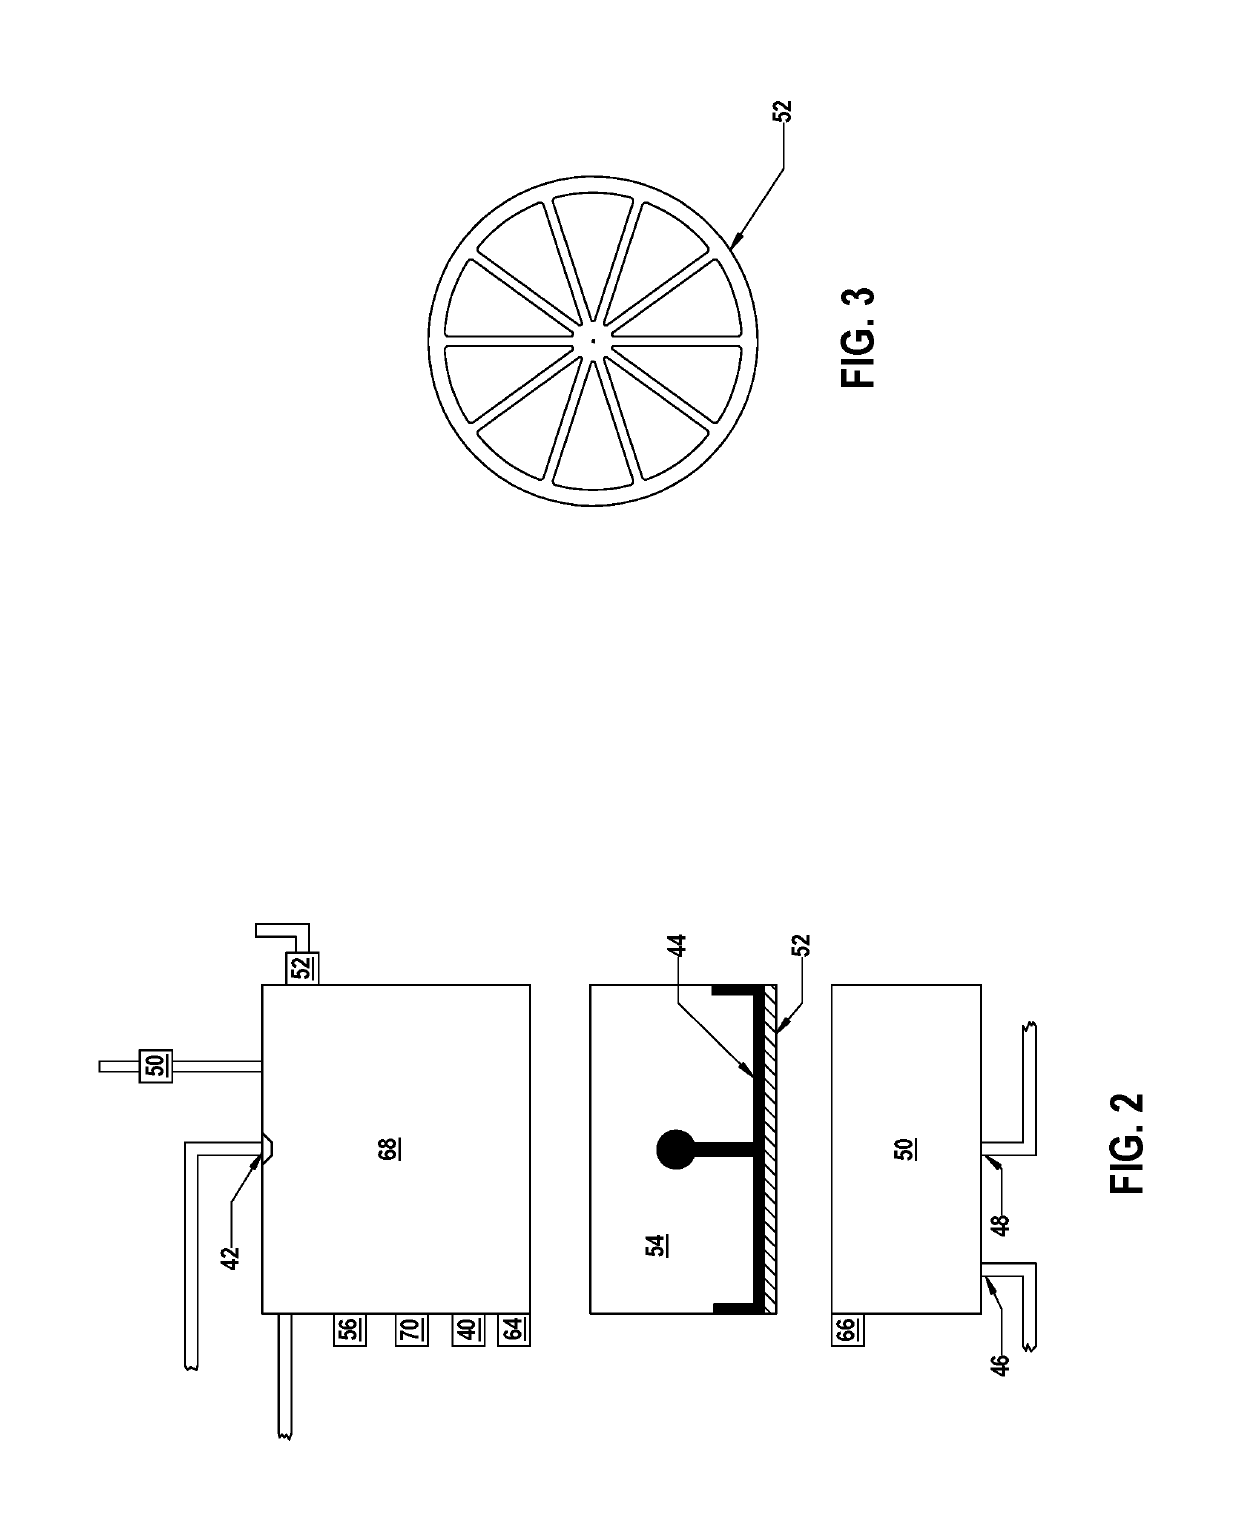 Beverage brewing apparatus and related method